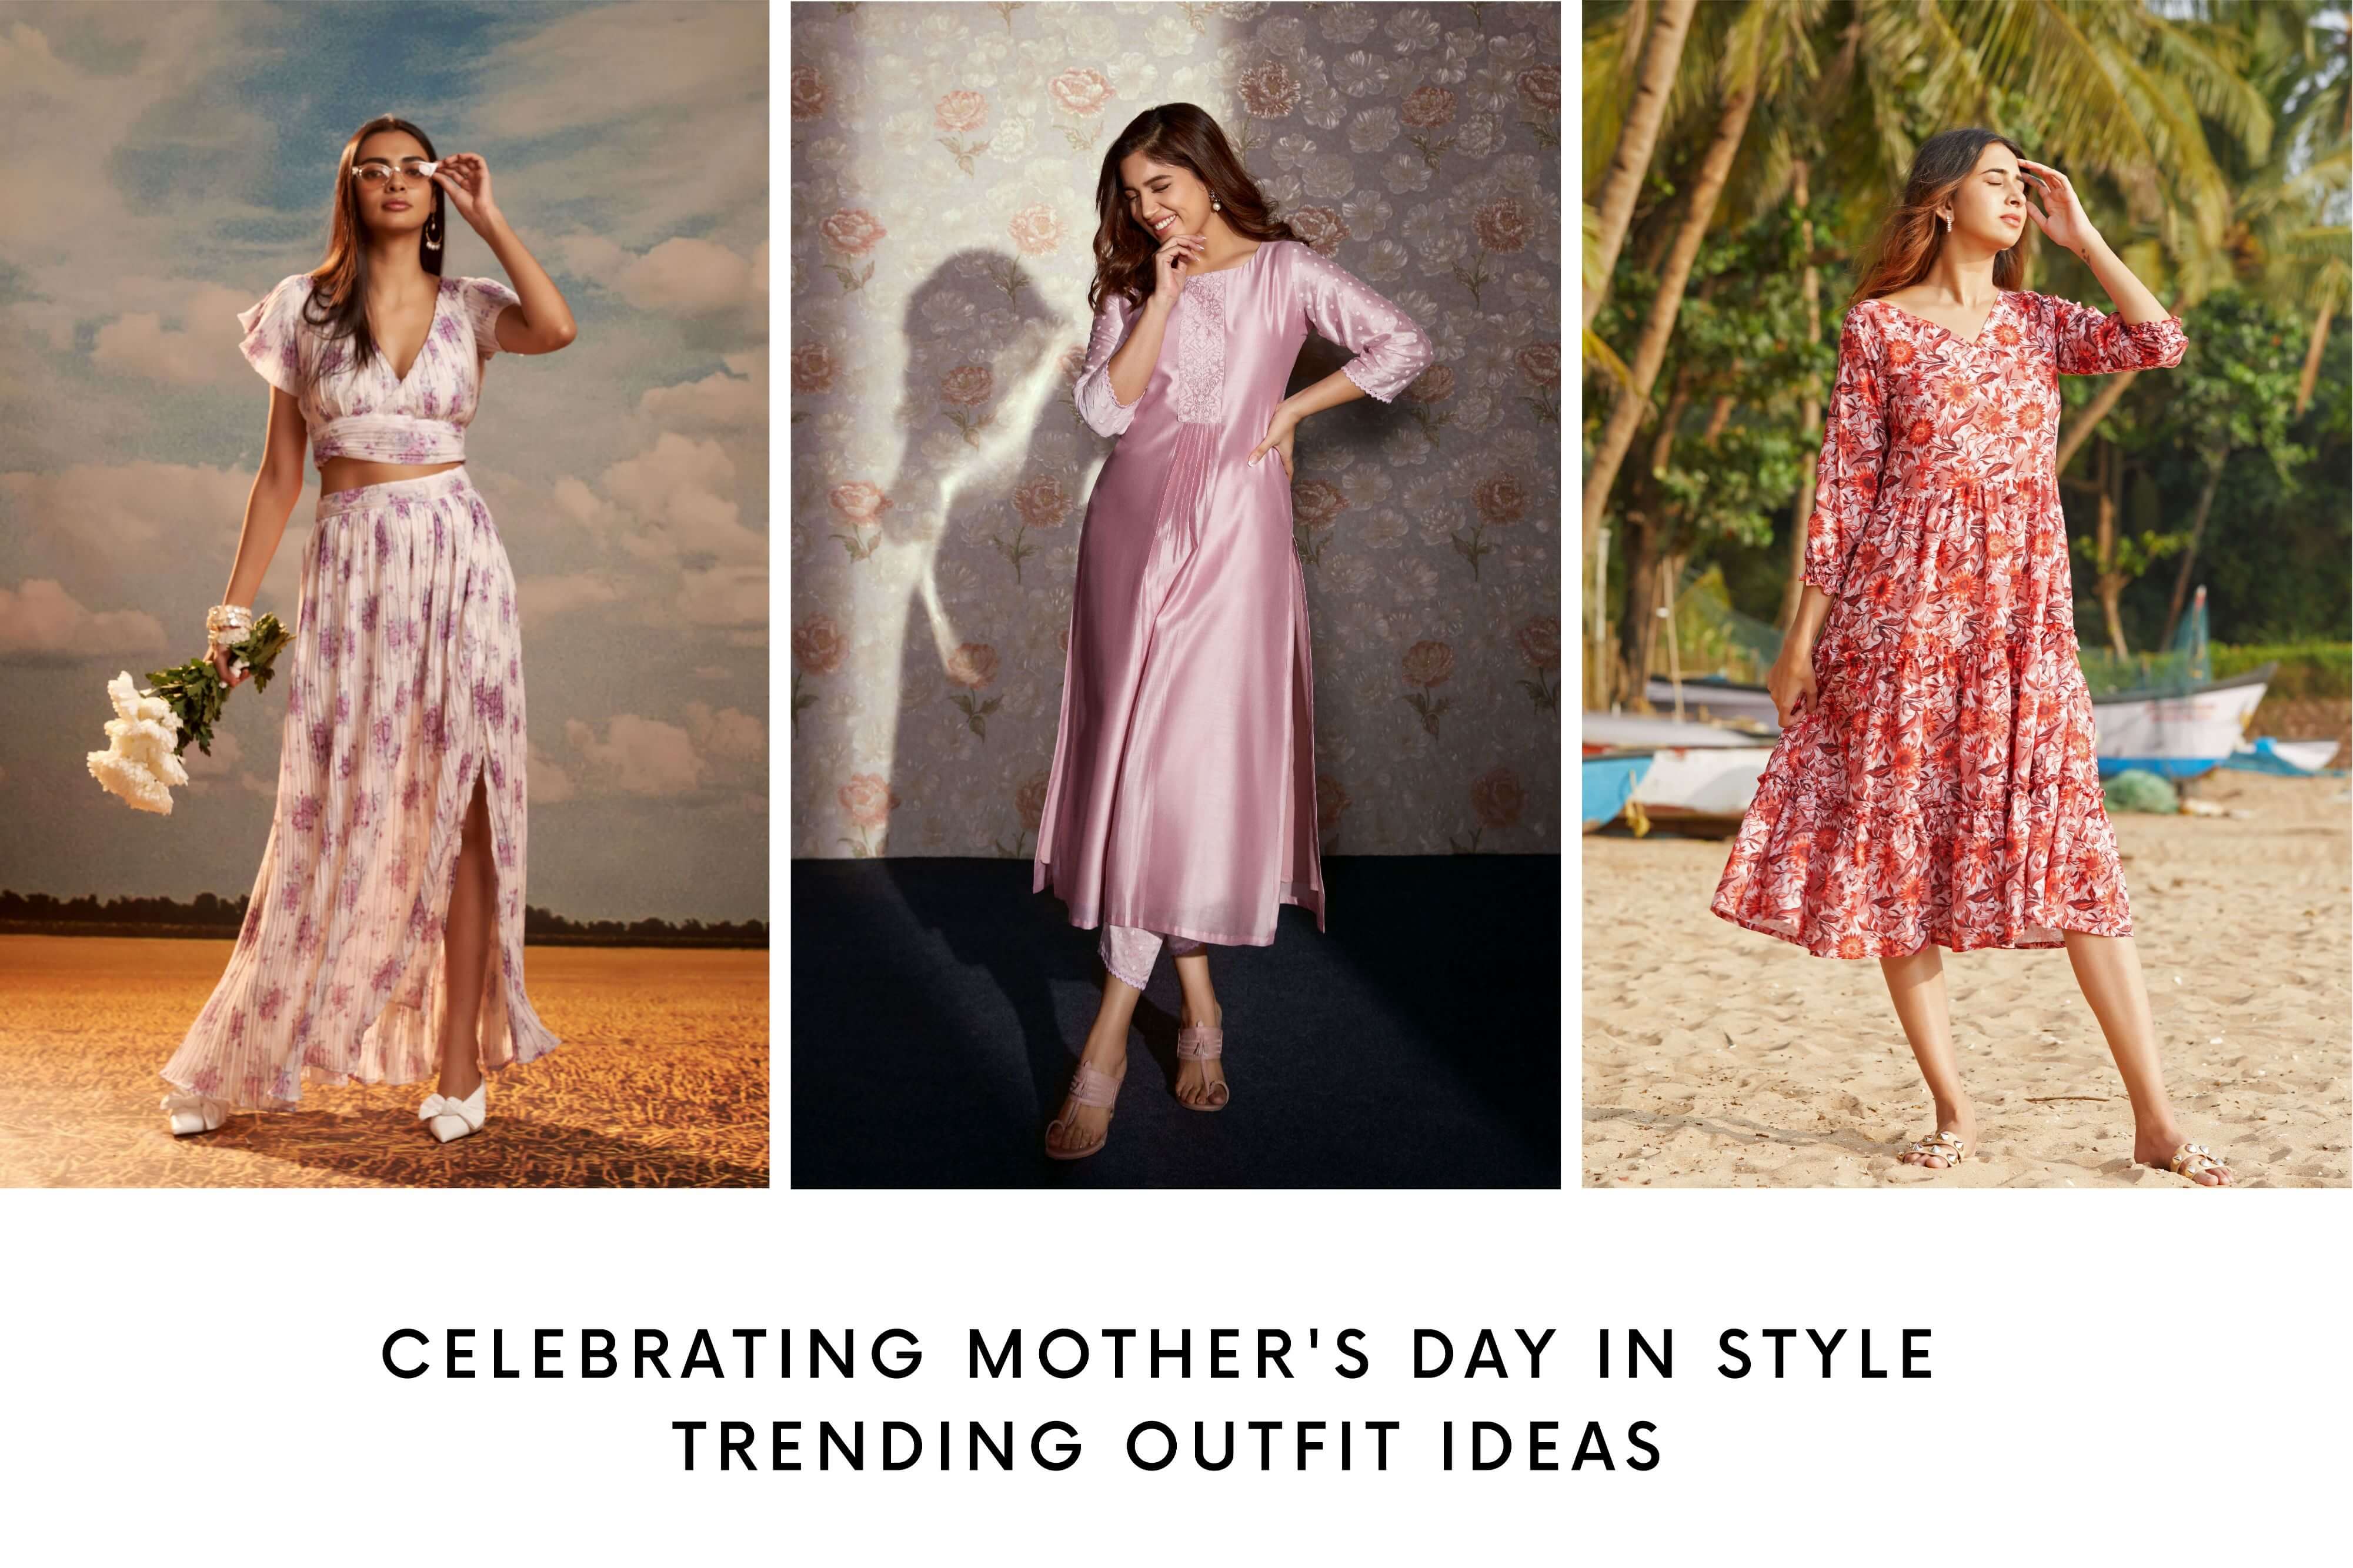 Celebrating Mother's Day in Style: Trending Outfit Ideas